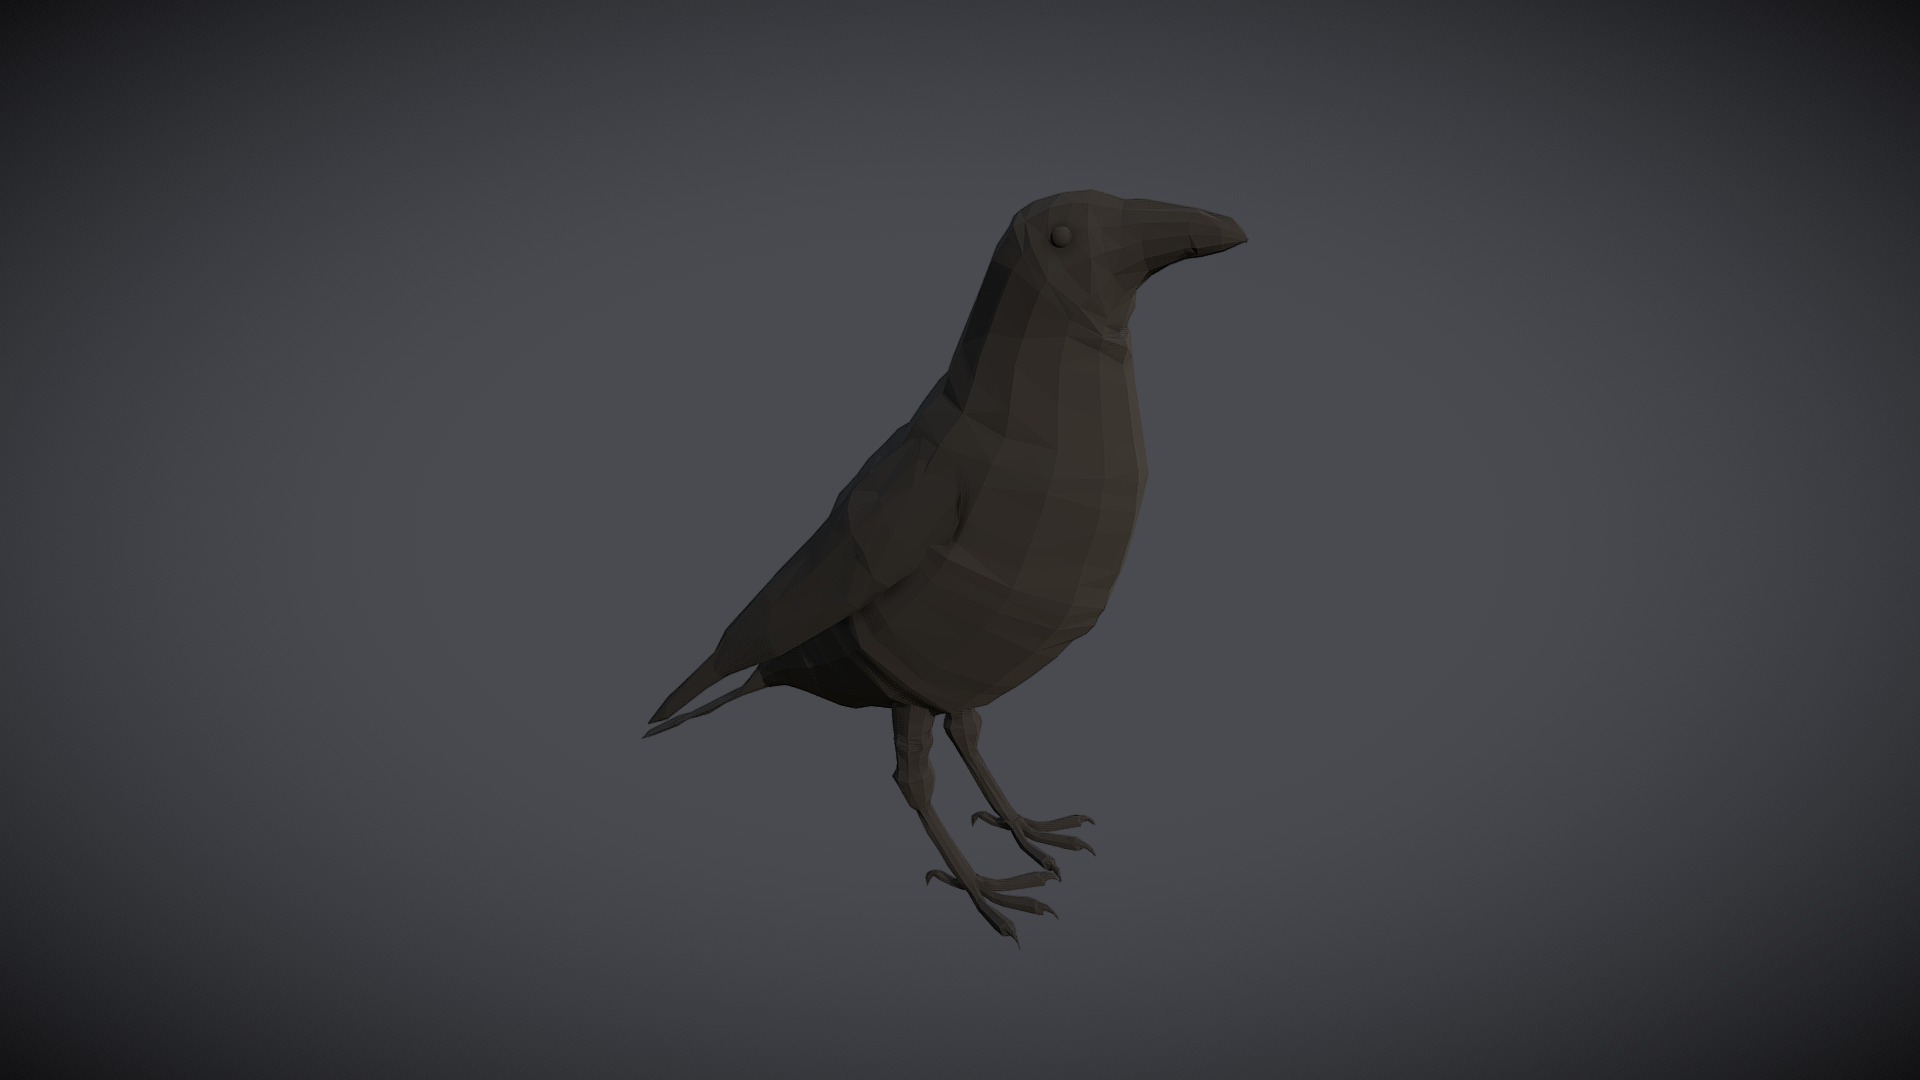 3D model Low-Poly Crow - This is a 3D model of the Low-Poly Crow. The 3D model is about a bird standing on a surface.